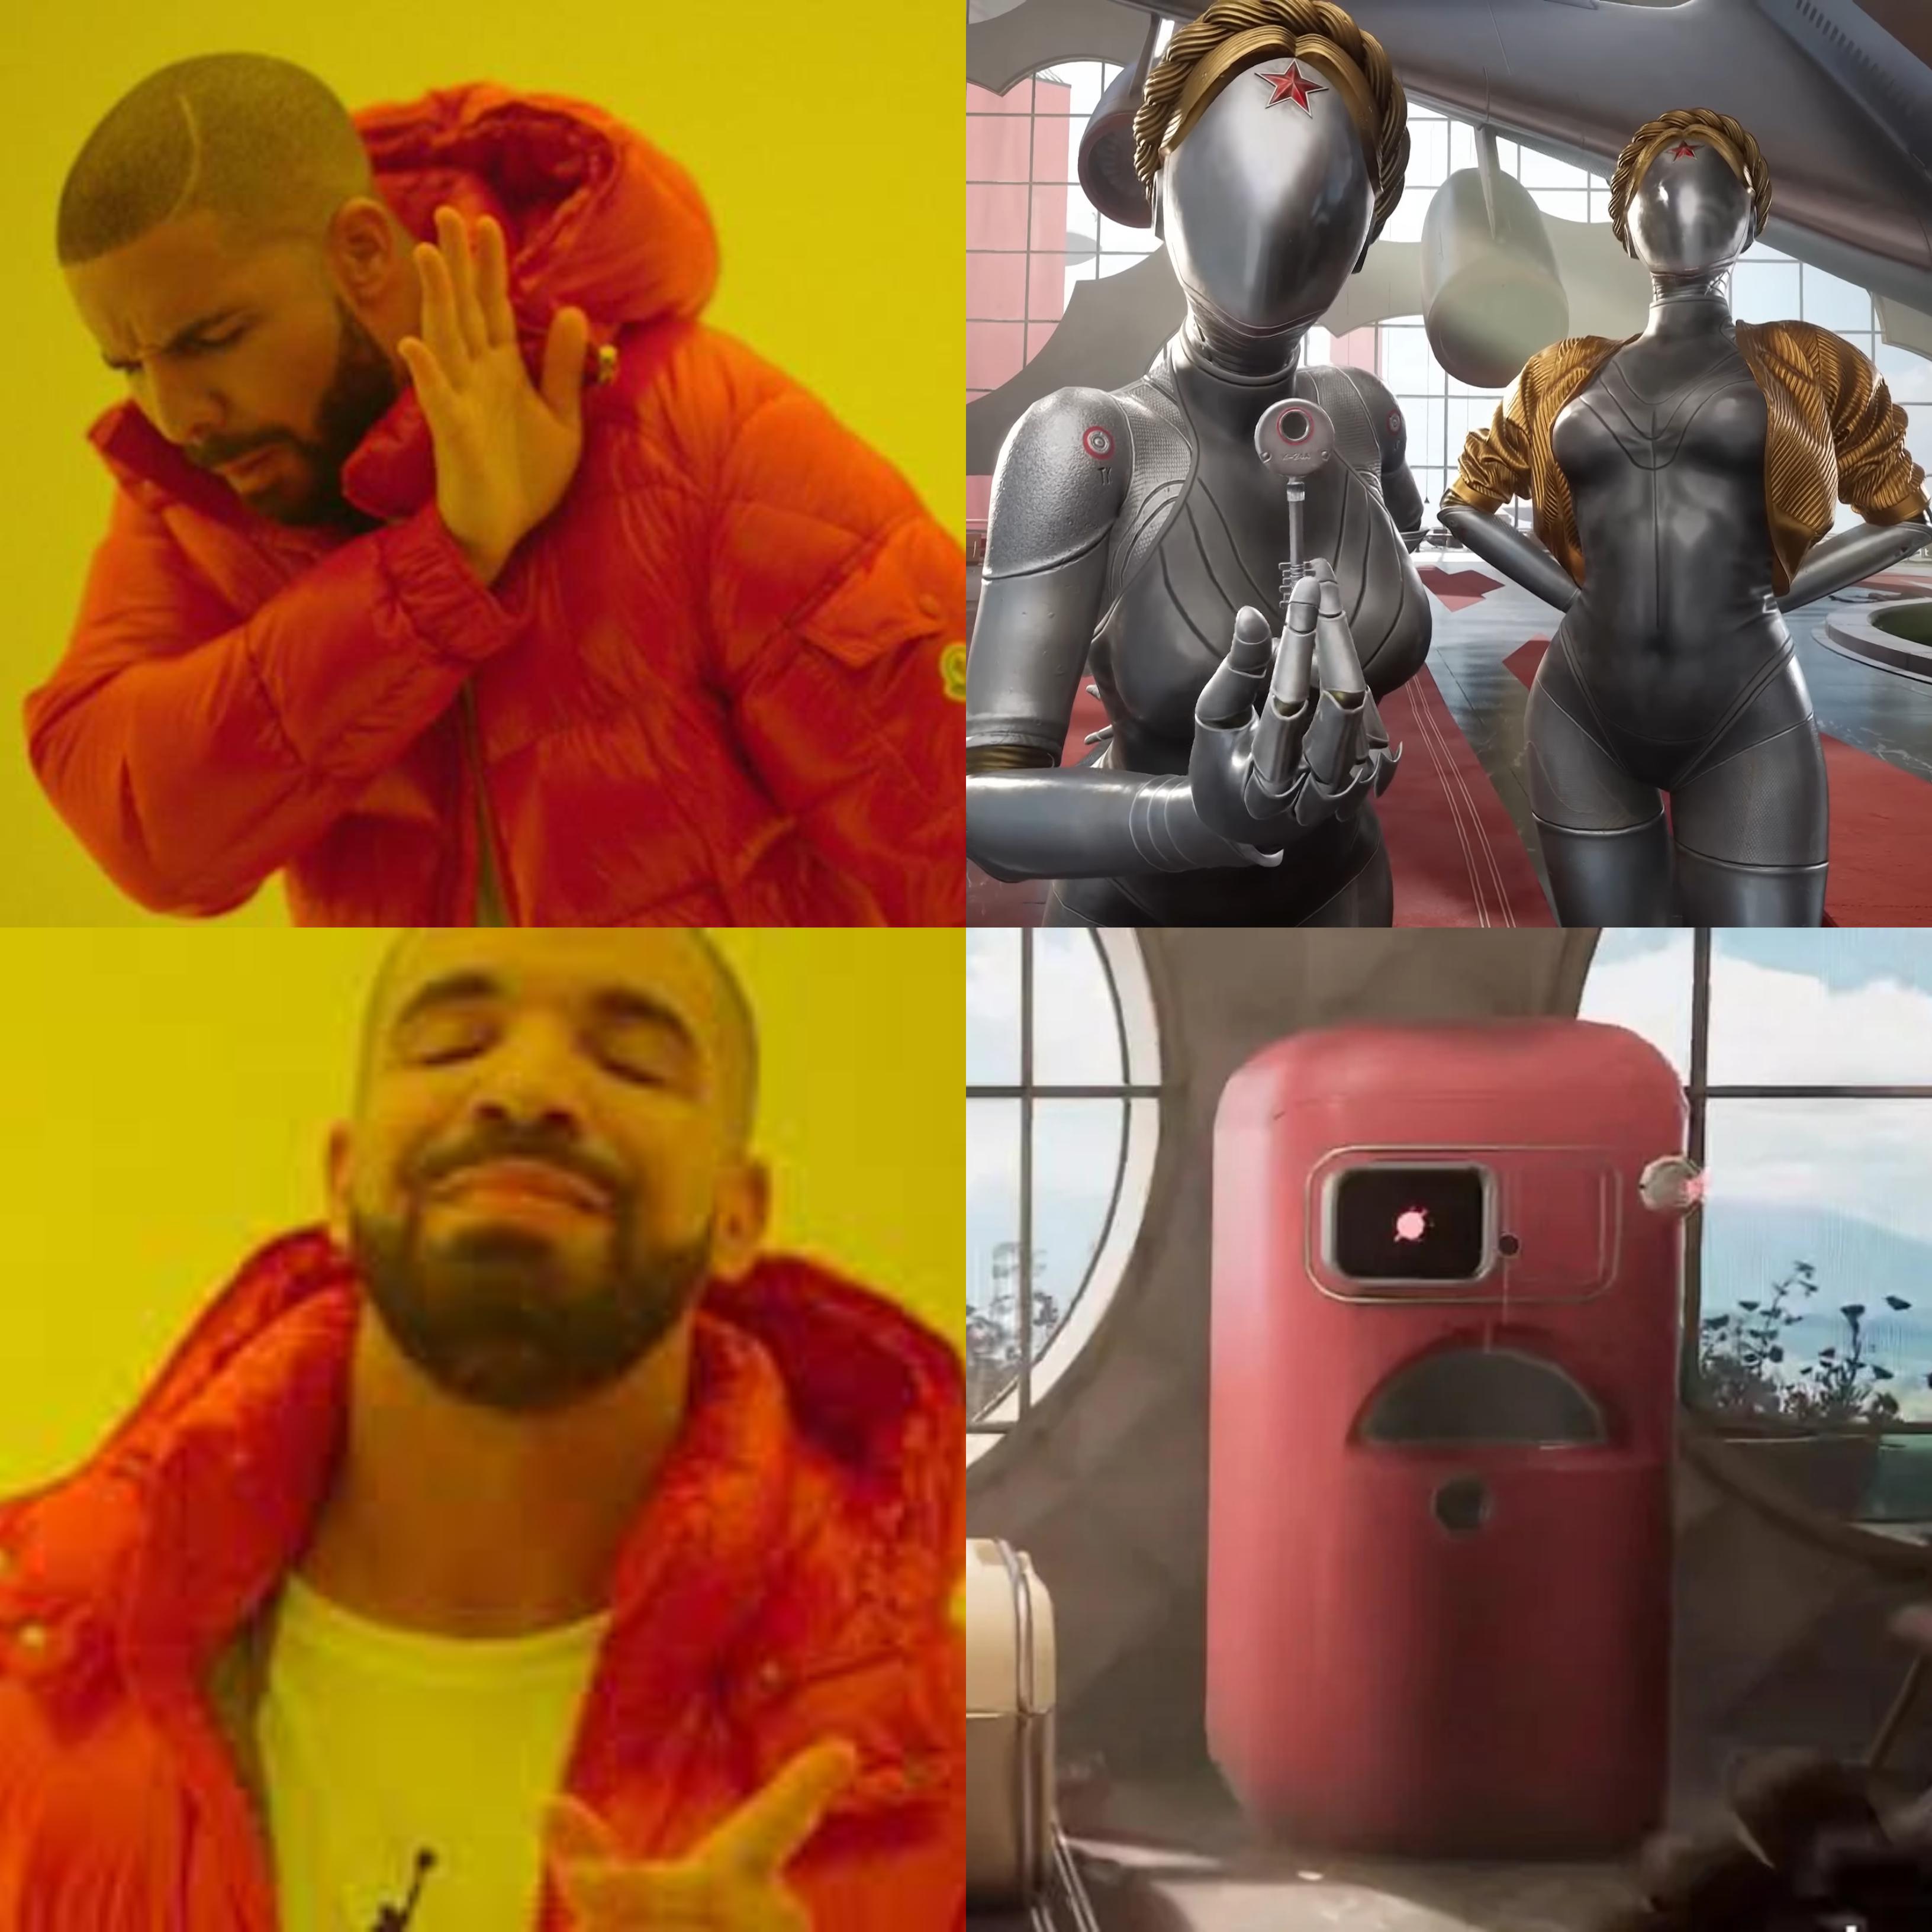 A popular meme format re-purposed to feature Atomic Heart's fridge as the preferred outcome.